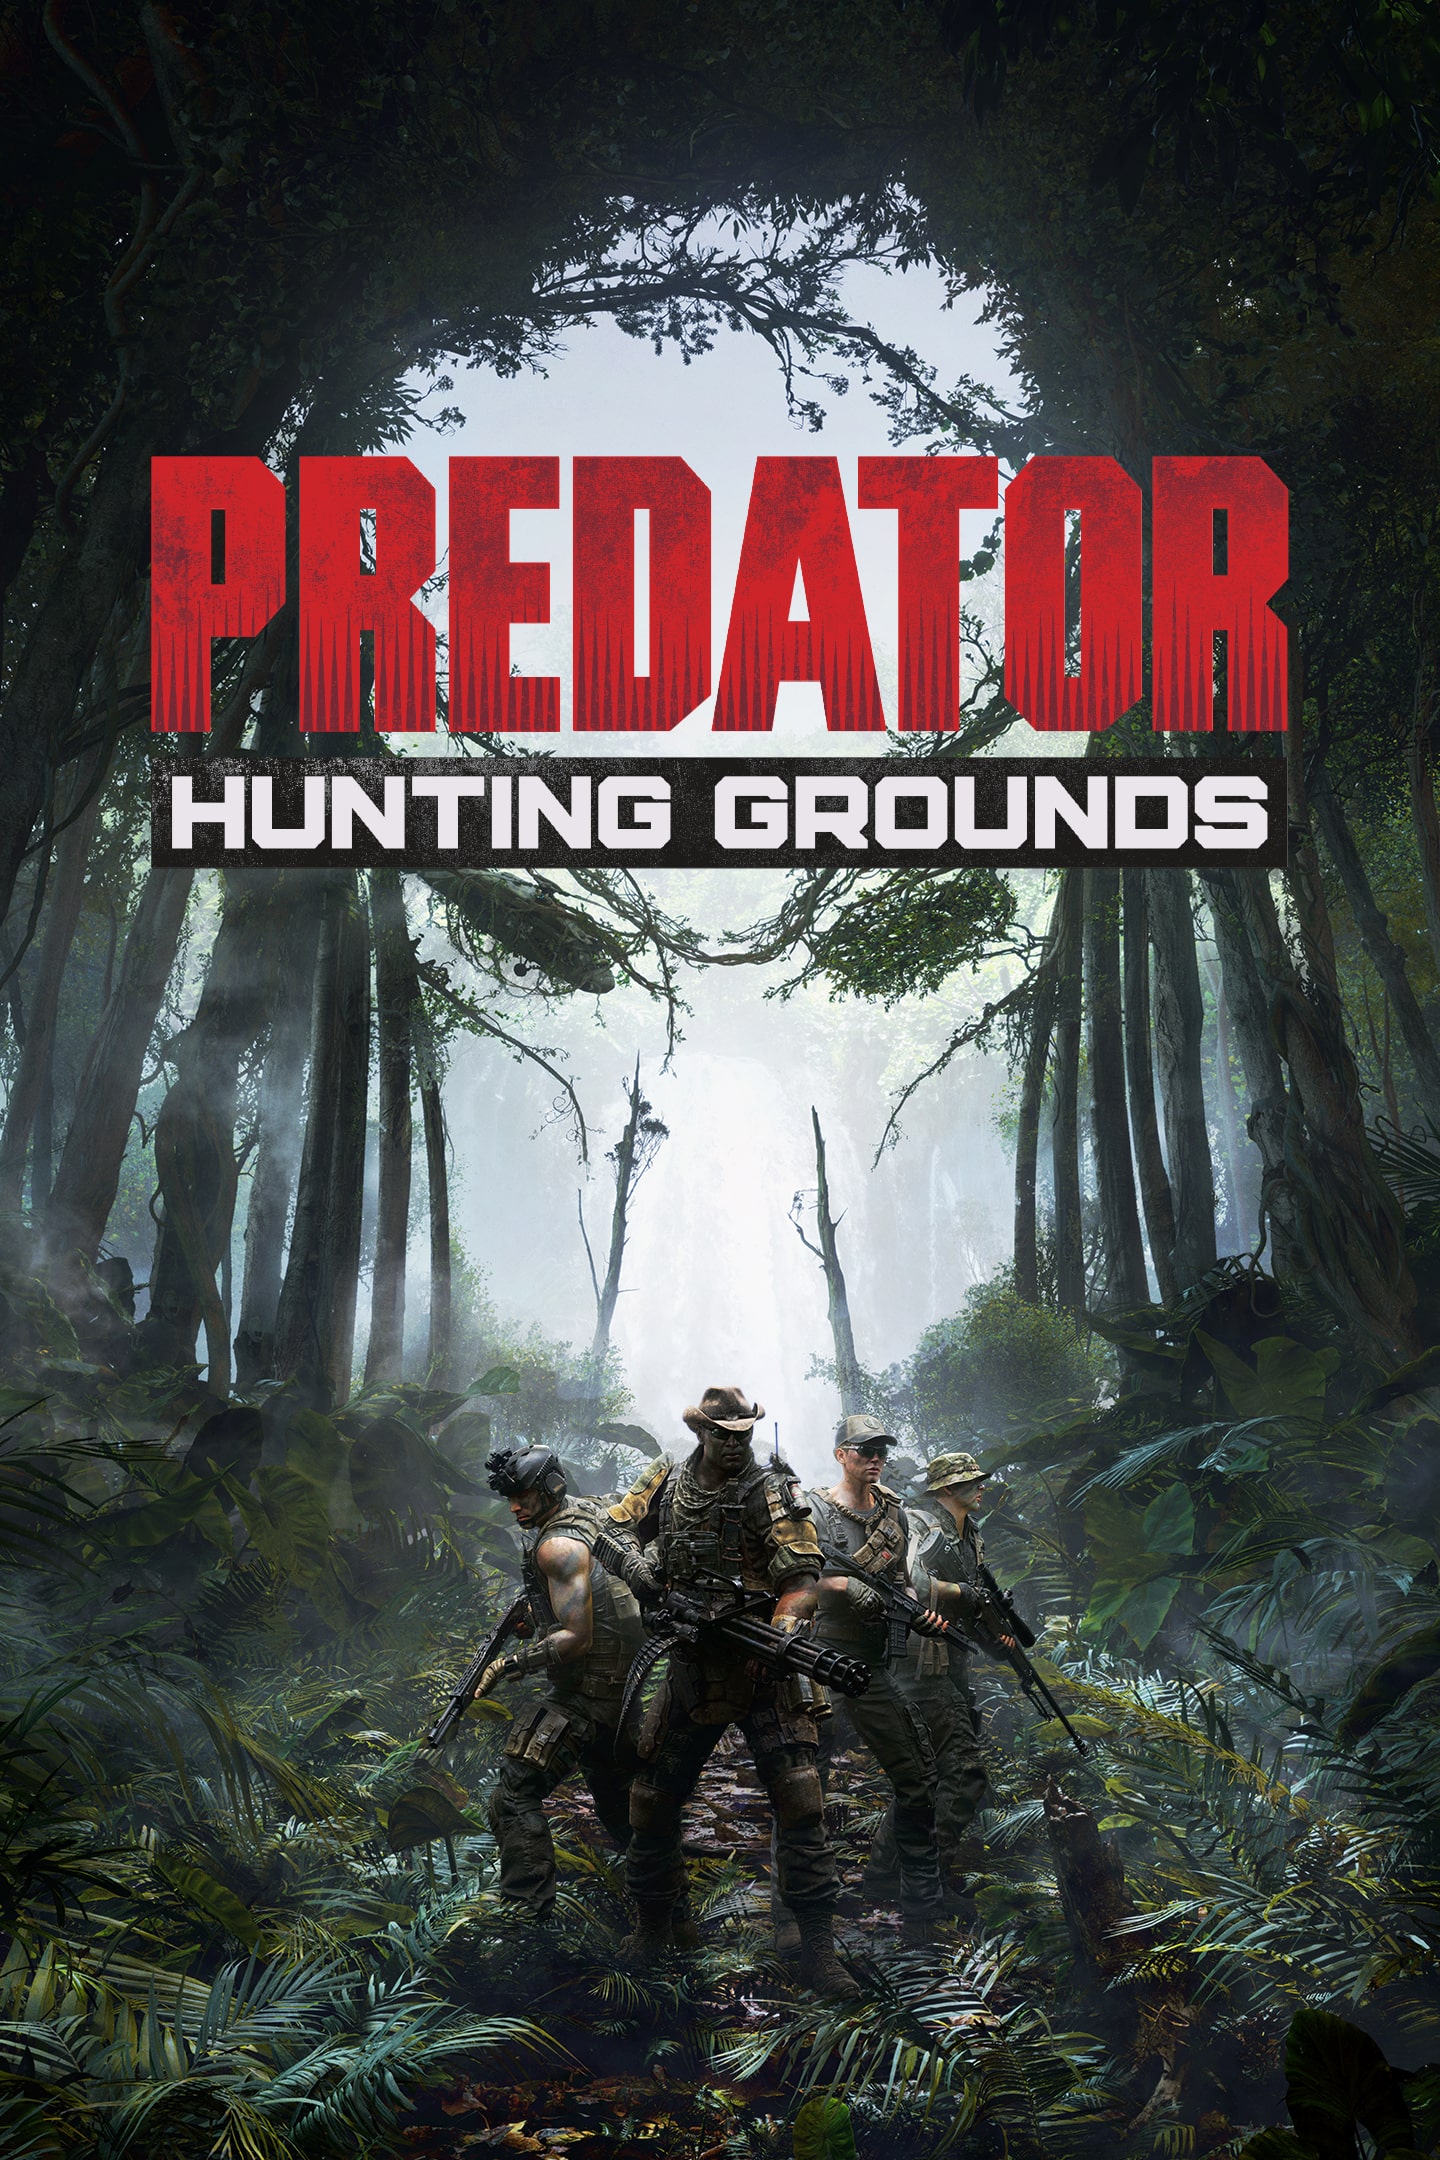 the hunting ground release date